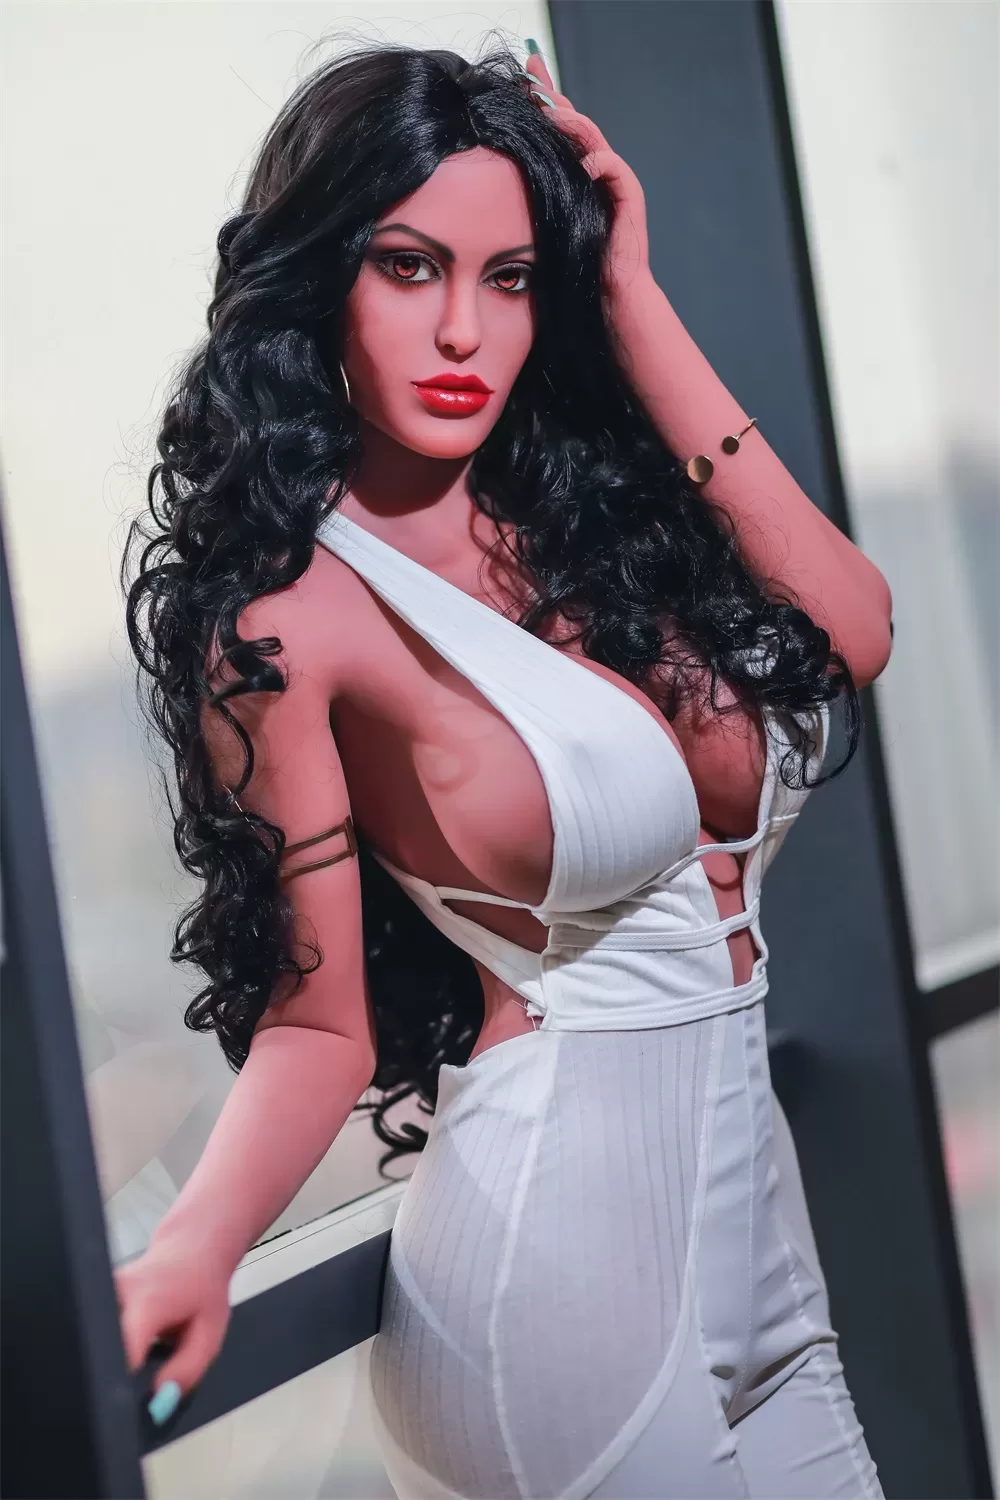 European And American Series Style Men's Sexual Masturbation Device Height 170cm Big Breasts Pink Nipples Vulva Organ Black Long Hair Soft Real Tan Skin Sex Young Woman Silicone Doll 6